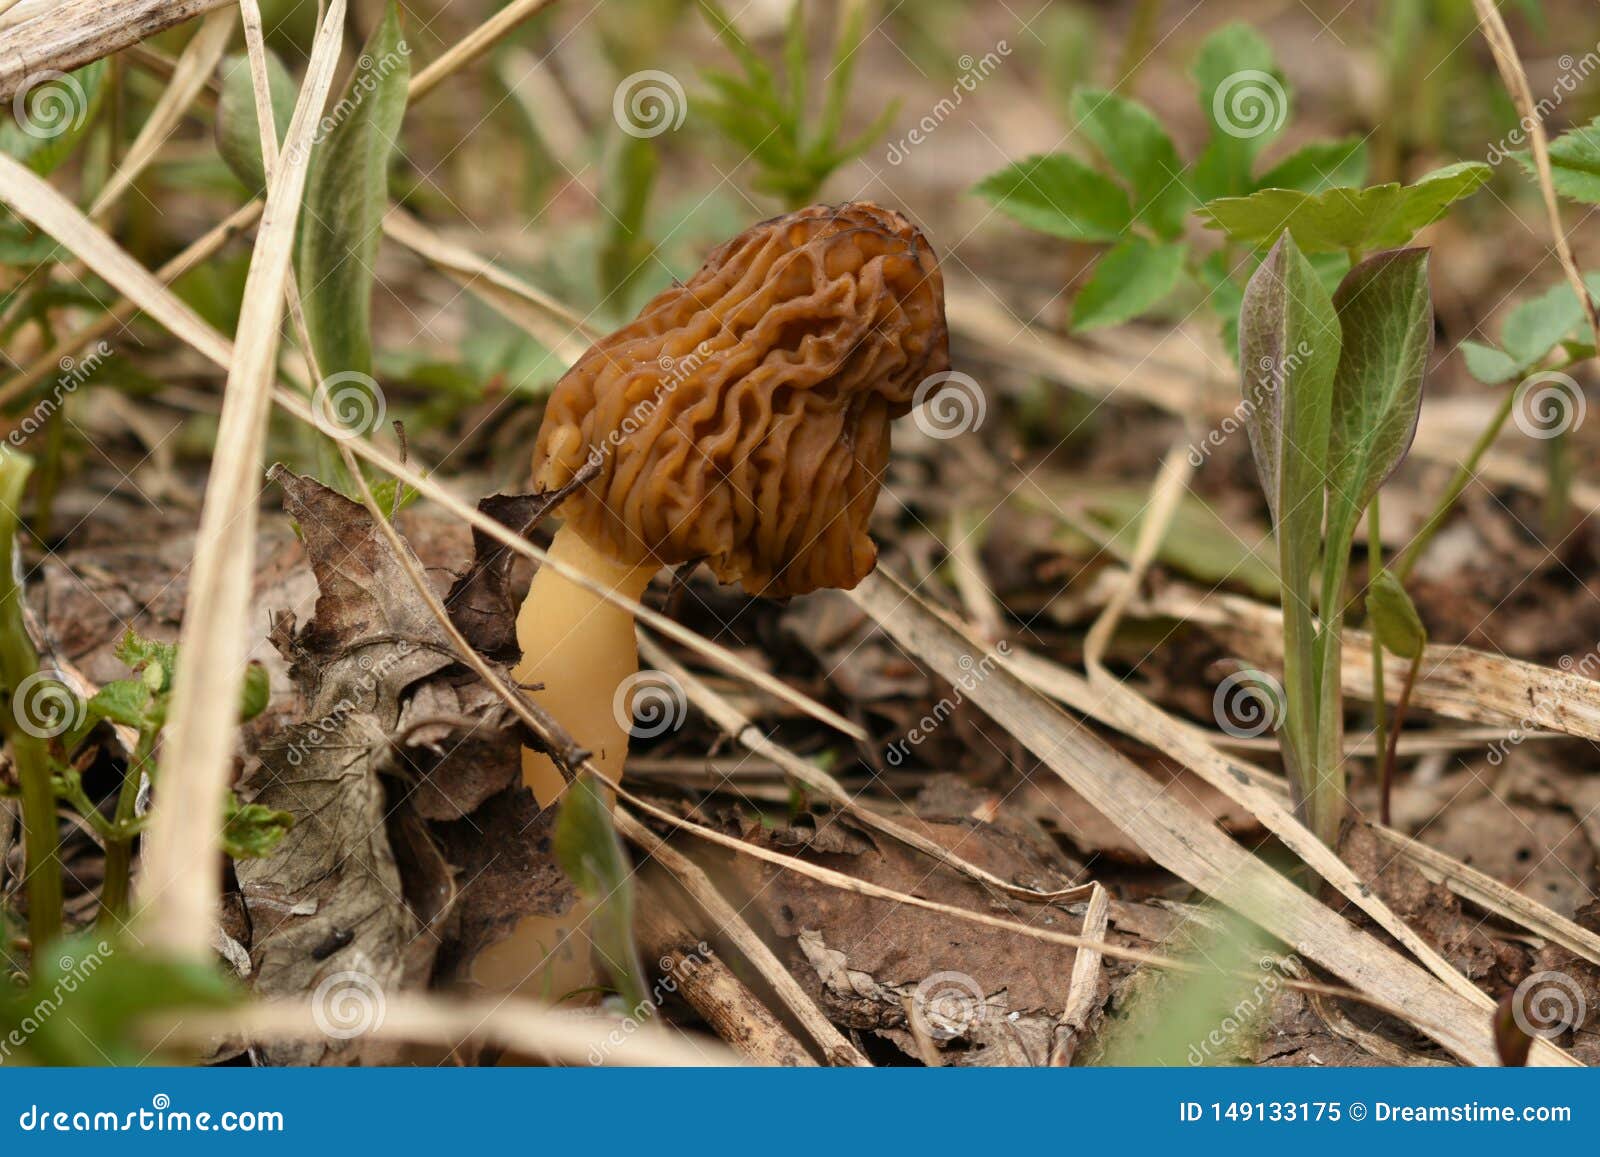 morel mushroom surrounded by green plants